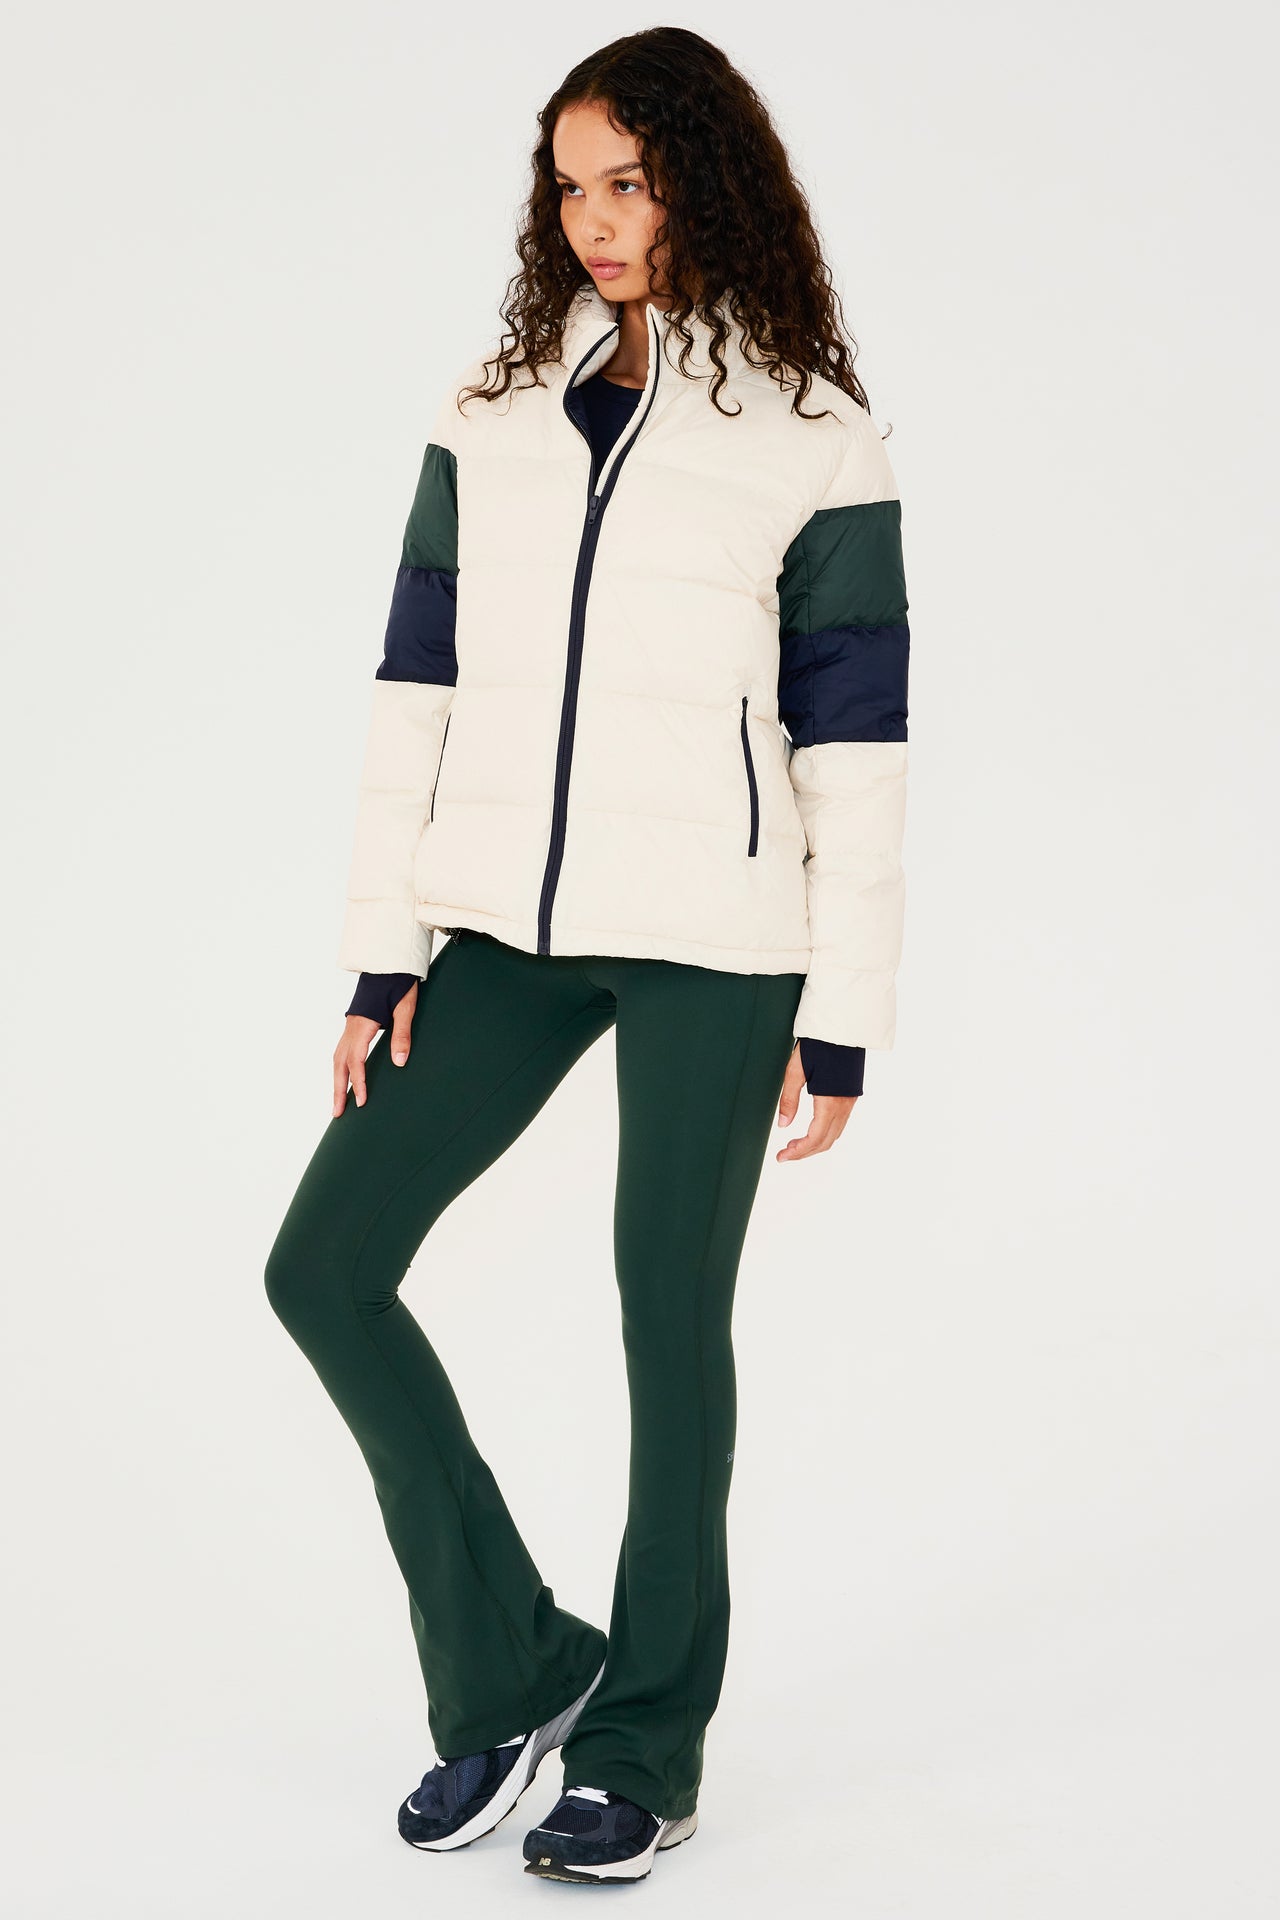 Full side view of girl wearing white puffer jacket with blue and green stripes on arms and sleeve cuffs with thumb holes and dark green flared leggings with dark blue shoes